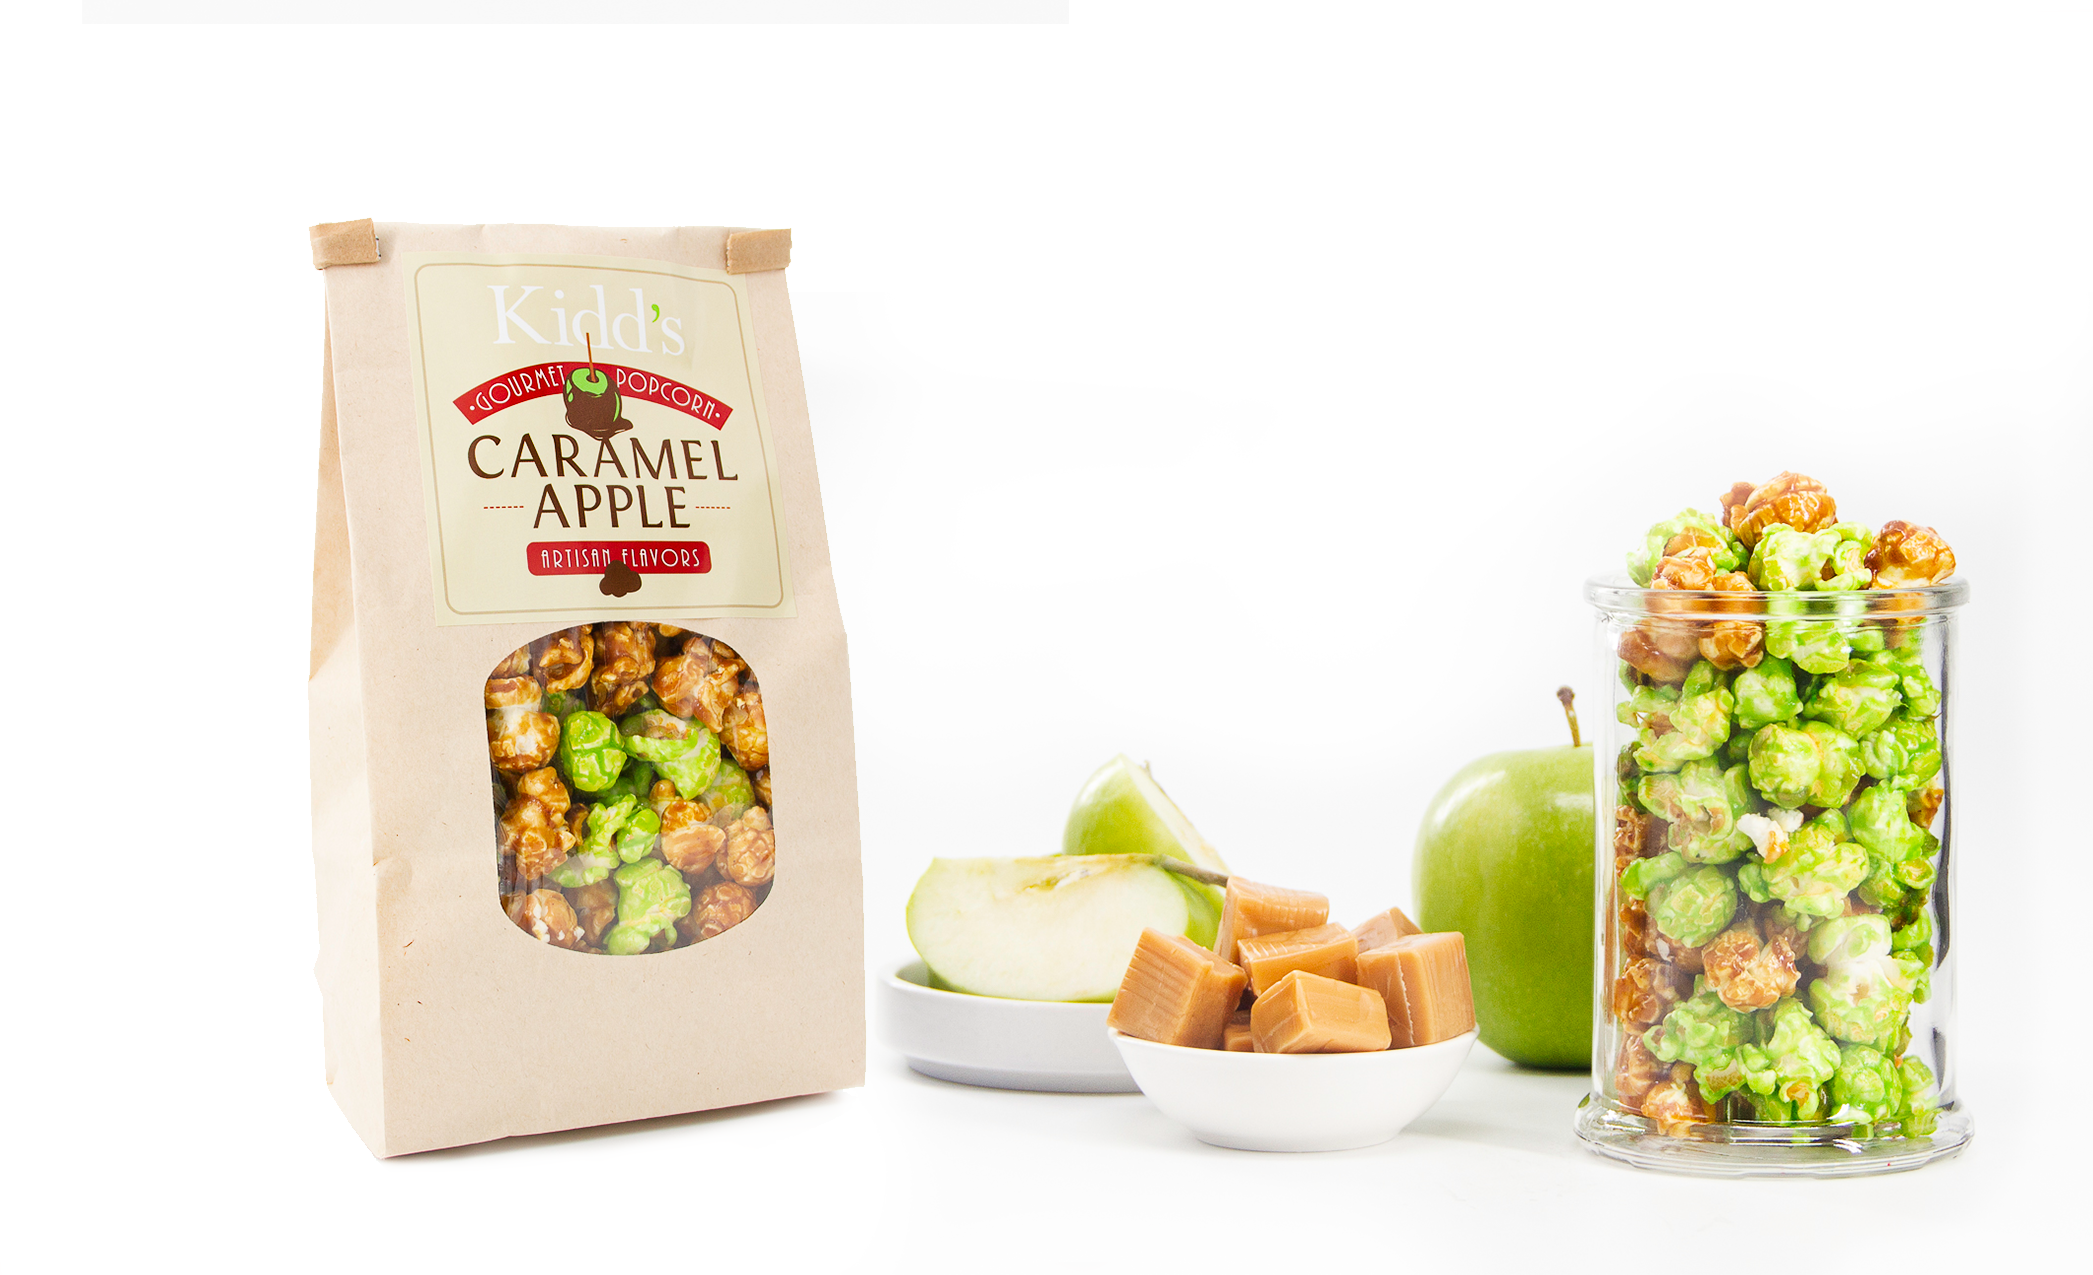 Specialty flavors gourmet popcorn in Caramel Apple. Crunch, tart and sweet flavors mixed together in small bag. buy in sets of two.